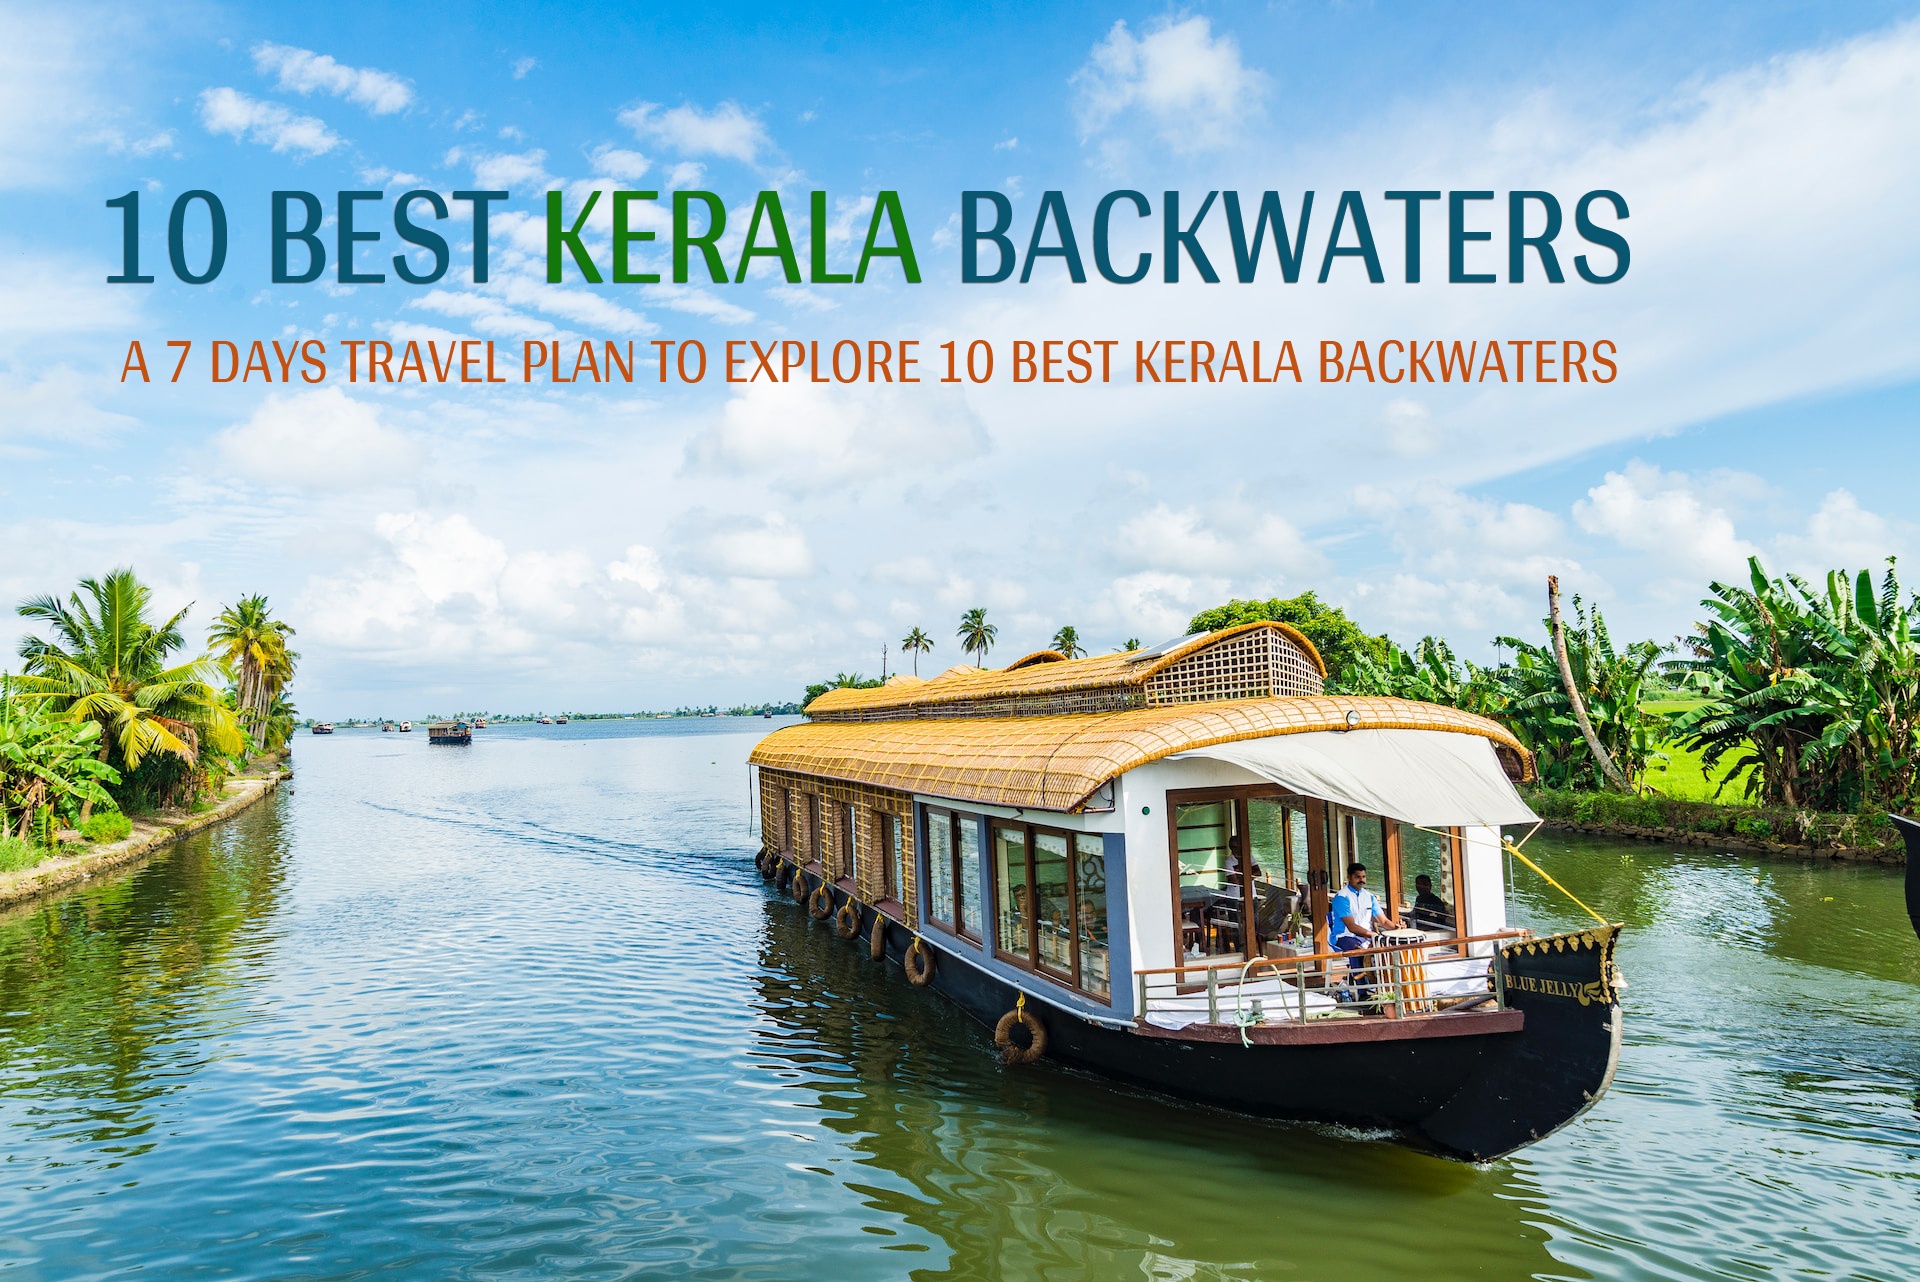 Best Kerala backwaters – A 7 days travel plan to explore 10 Best Kerala backwaters